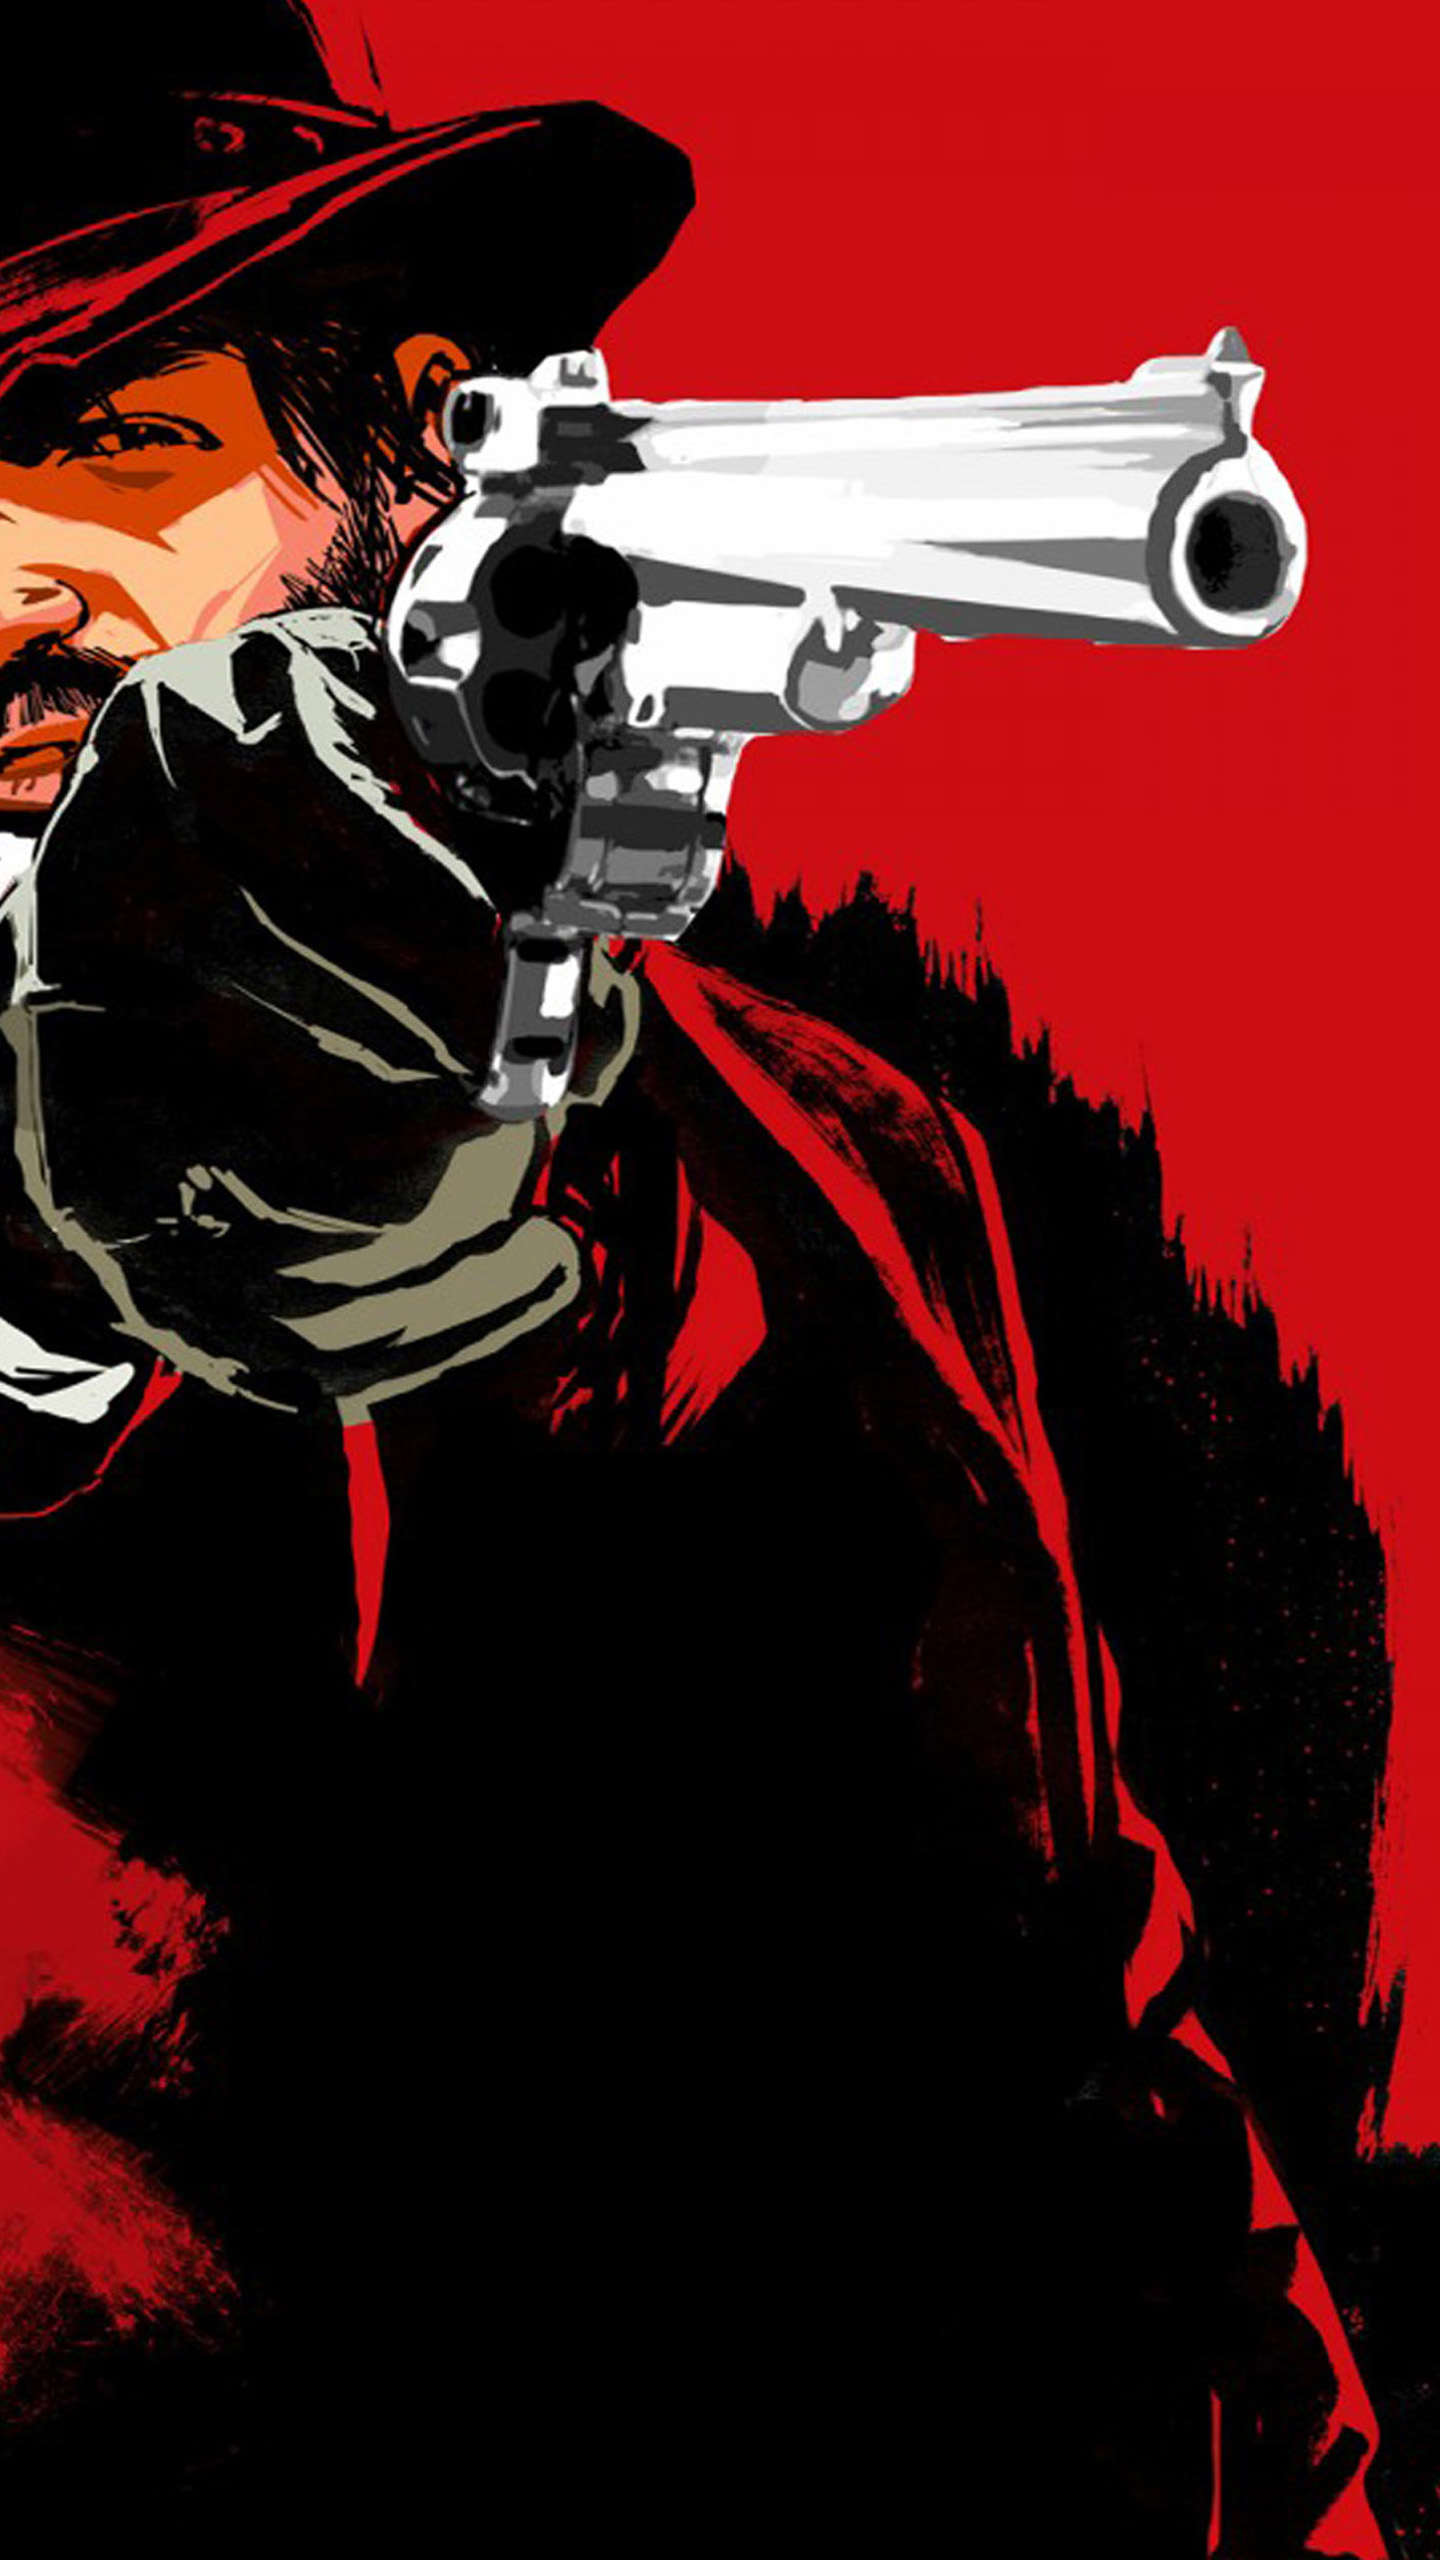 Free Download Red Dead Redemption 3 Lg G3 Wallpapers Lg G3